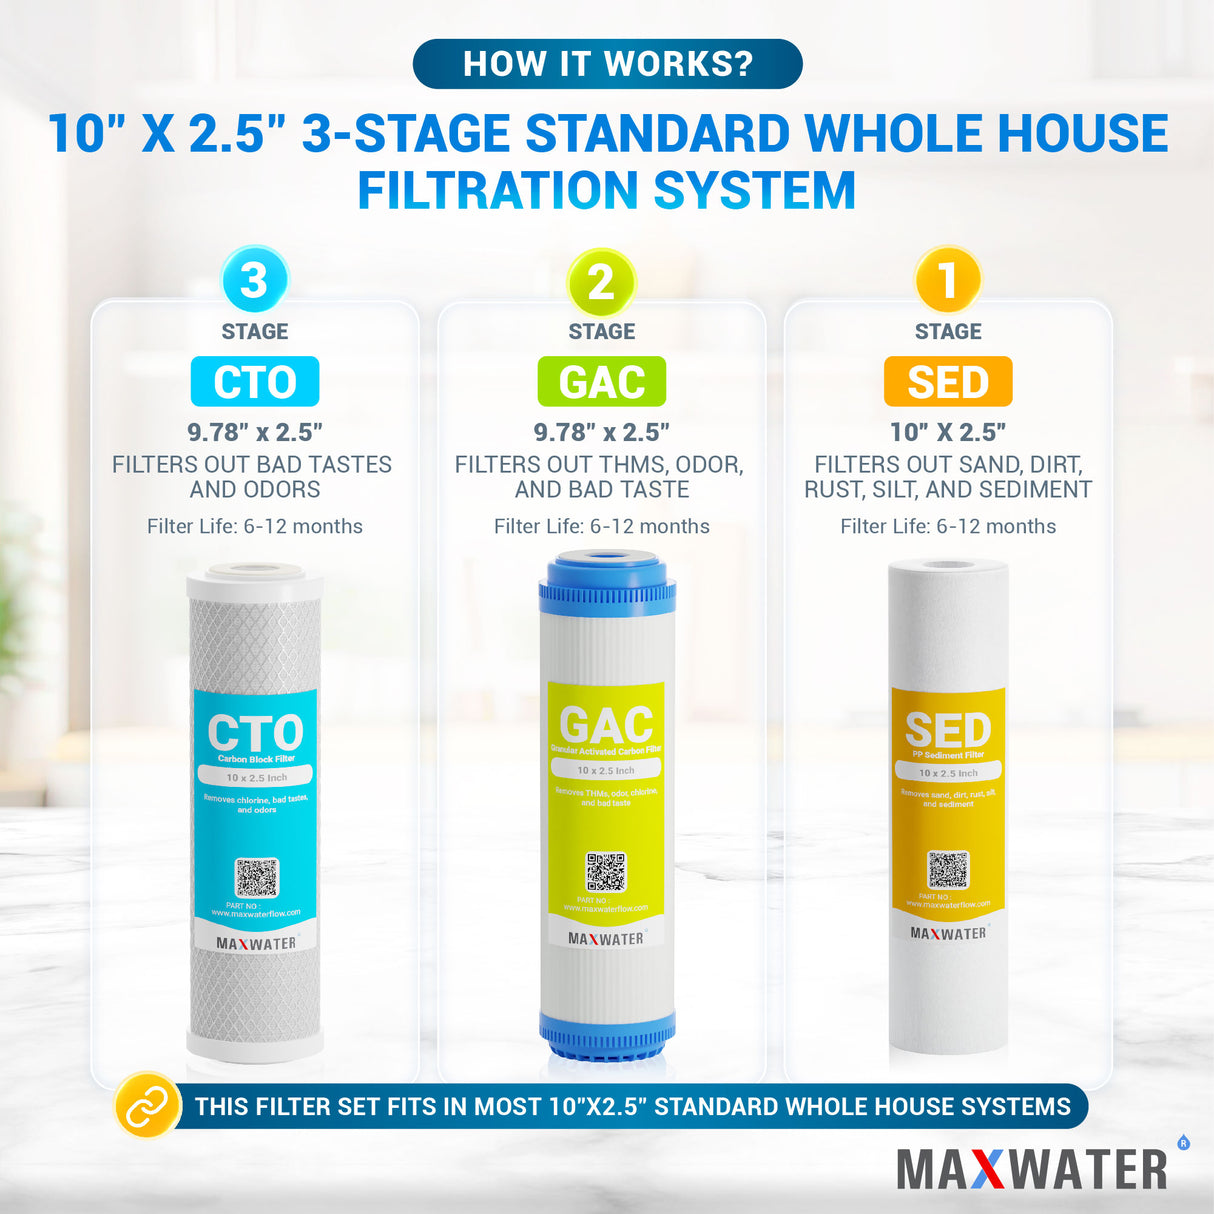 10' x 2.5' whole house water filtration system featuring sediment, GAC, and CTO filtration